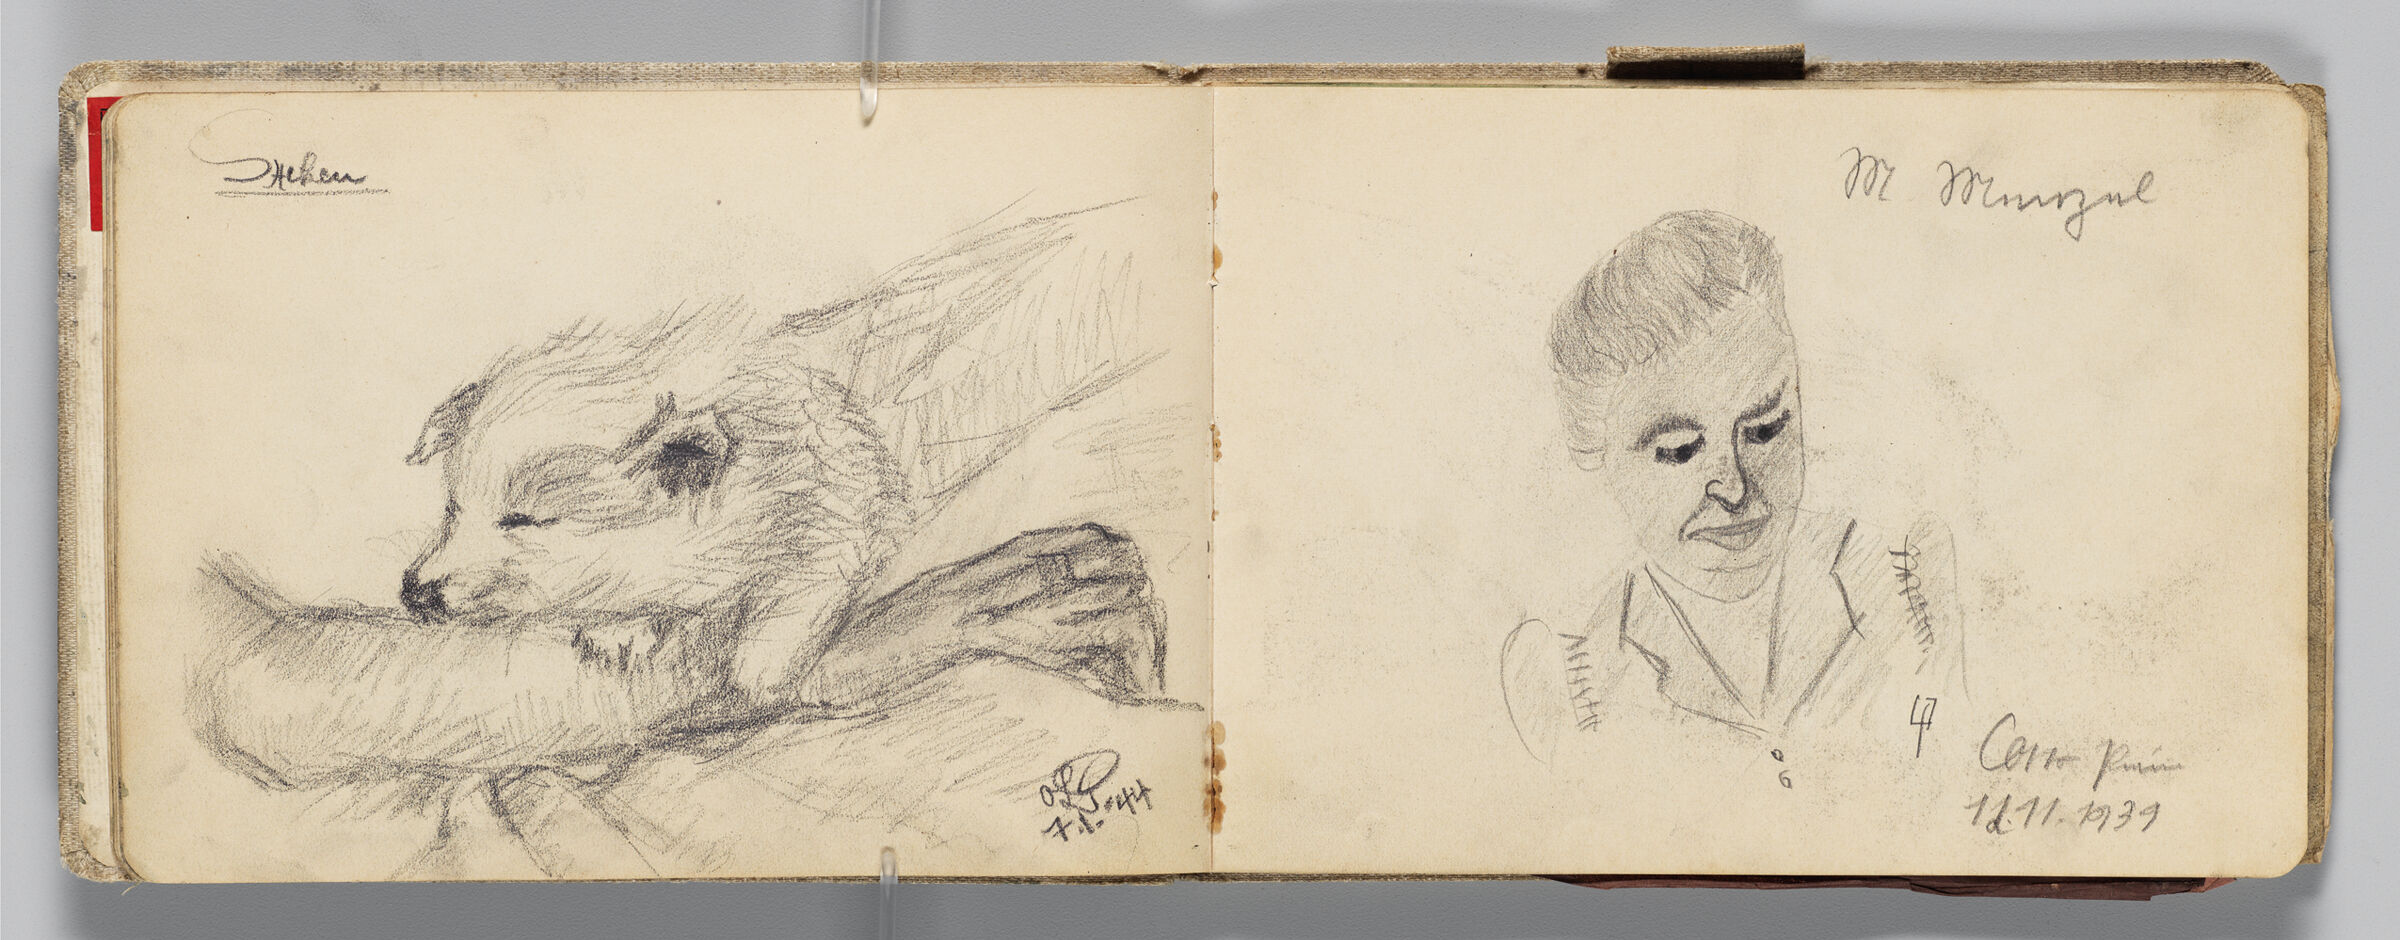 Untitled (Sketch Of Sleeping Dog In Figure's Lap, Left Page); Untitled (Portrait Of A Female Figure [Mrs. Menzel], Right Page)